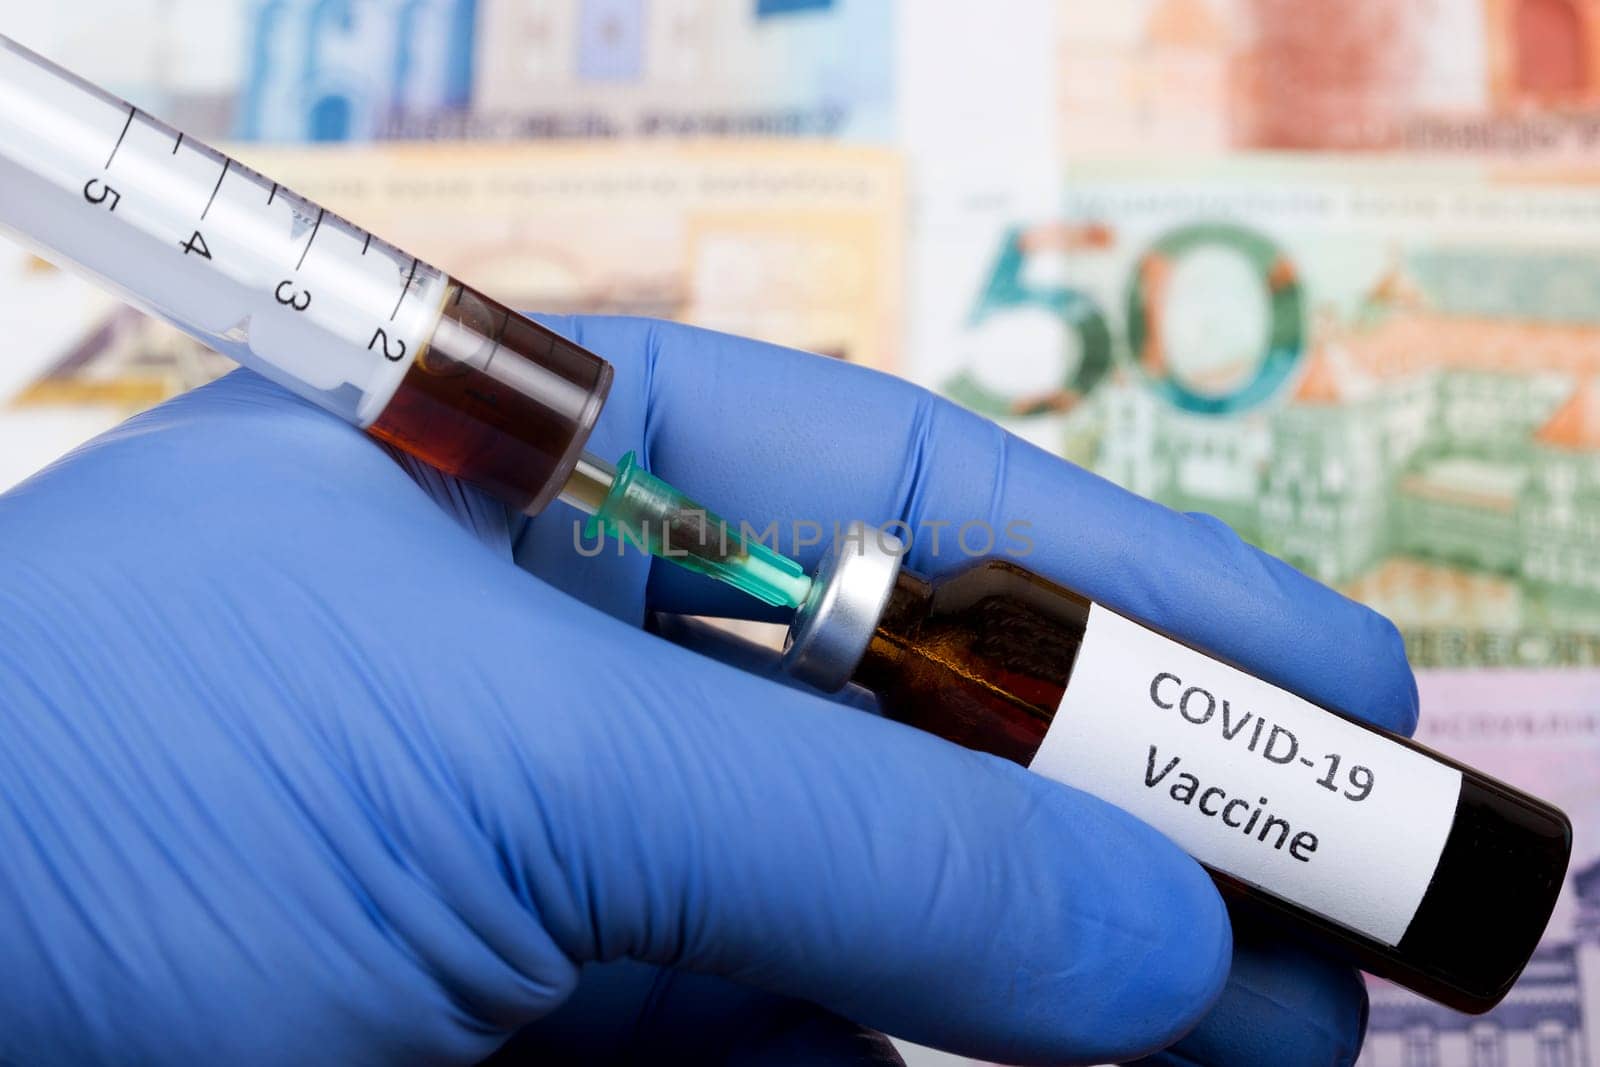 Vaccine against Covid-19 on the background of Belarusian money by johan10